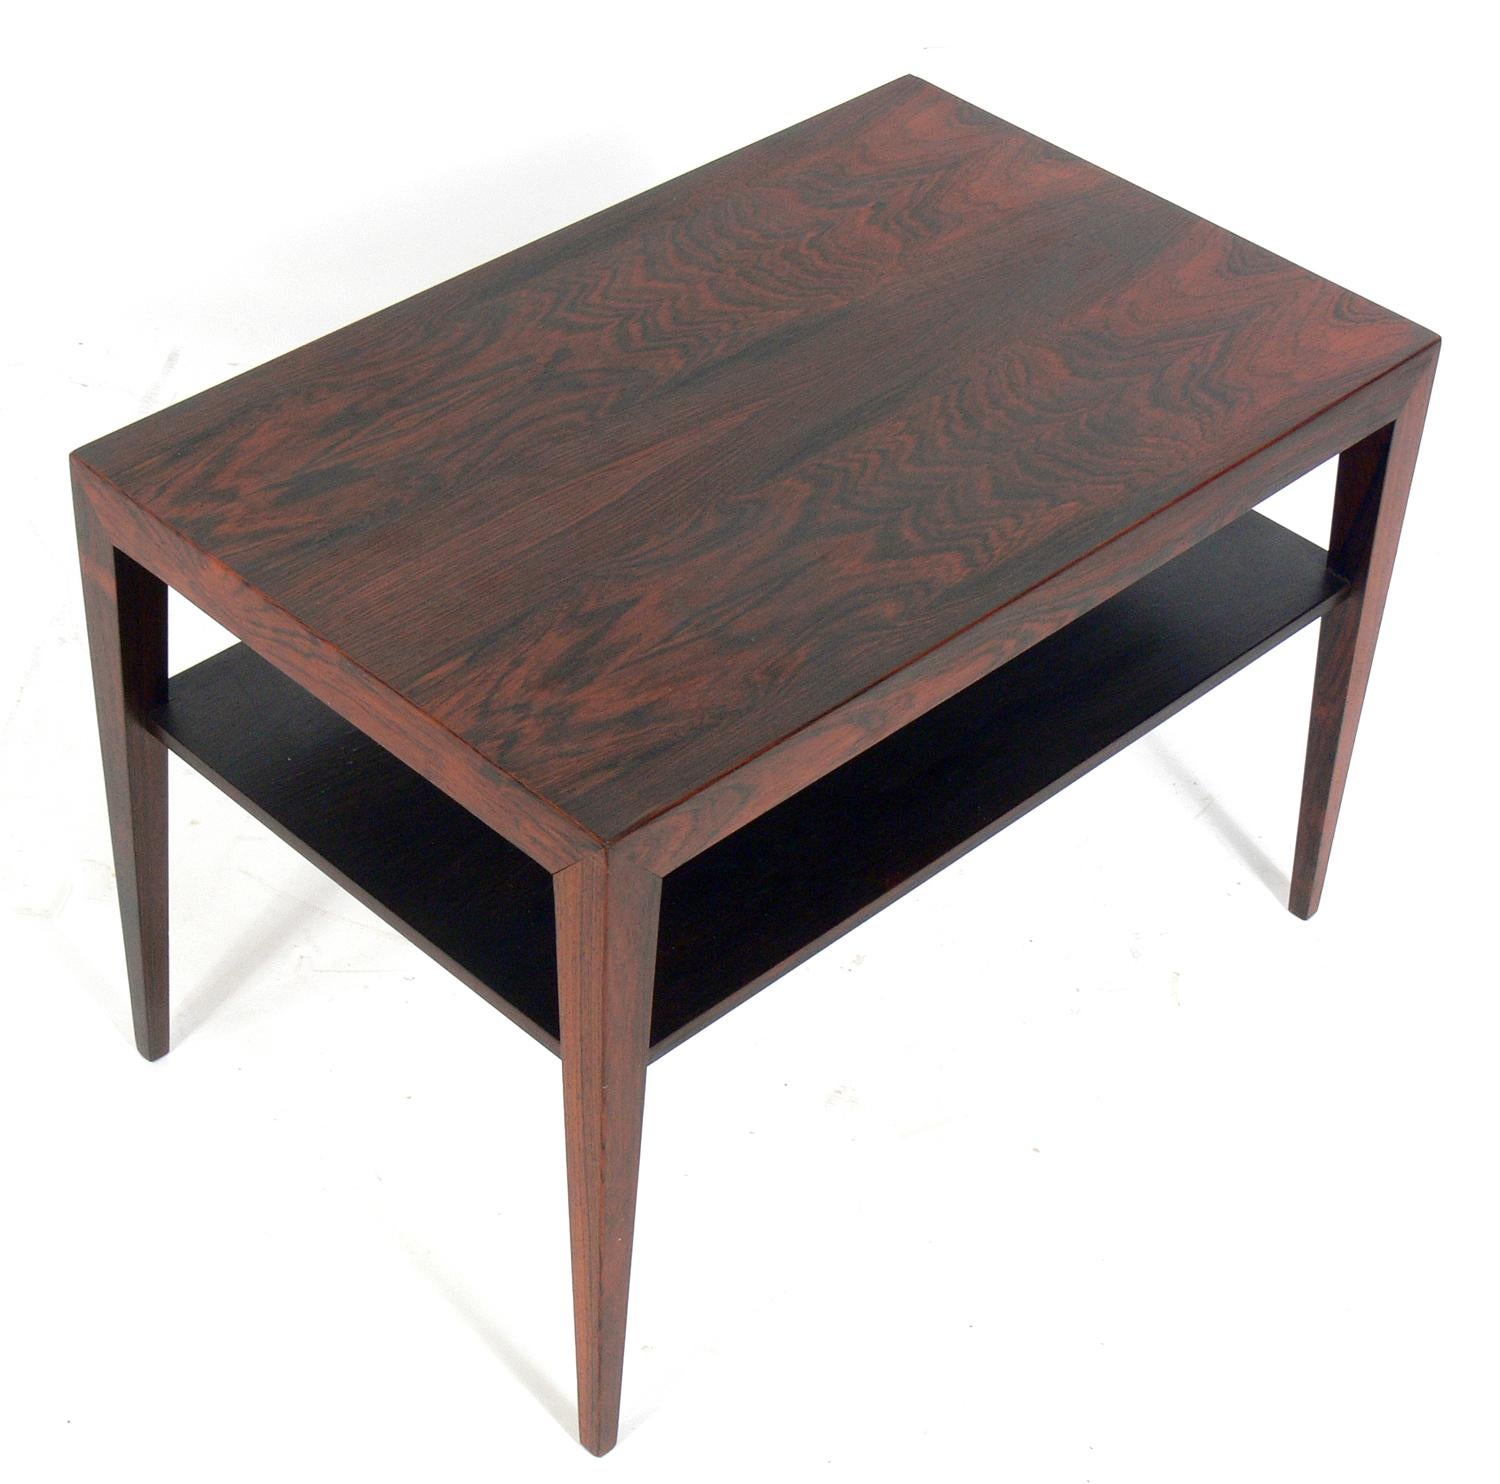 Danish modern rosewood end table, designed by Severin Hansen Jr. for Haslev Møbelsnedkeri A/S, Danish, circa 1960s. It is a versatile size and can be used as a end or side table, or as a night stand. It has been cleaned and Danish oiled.